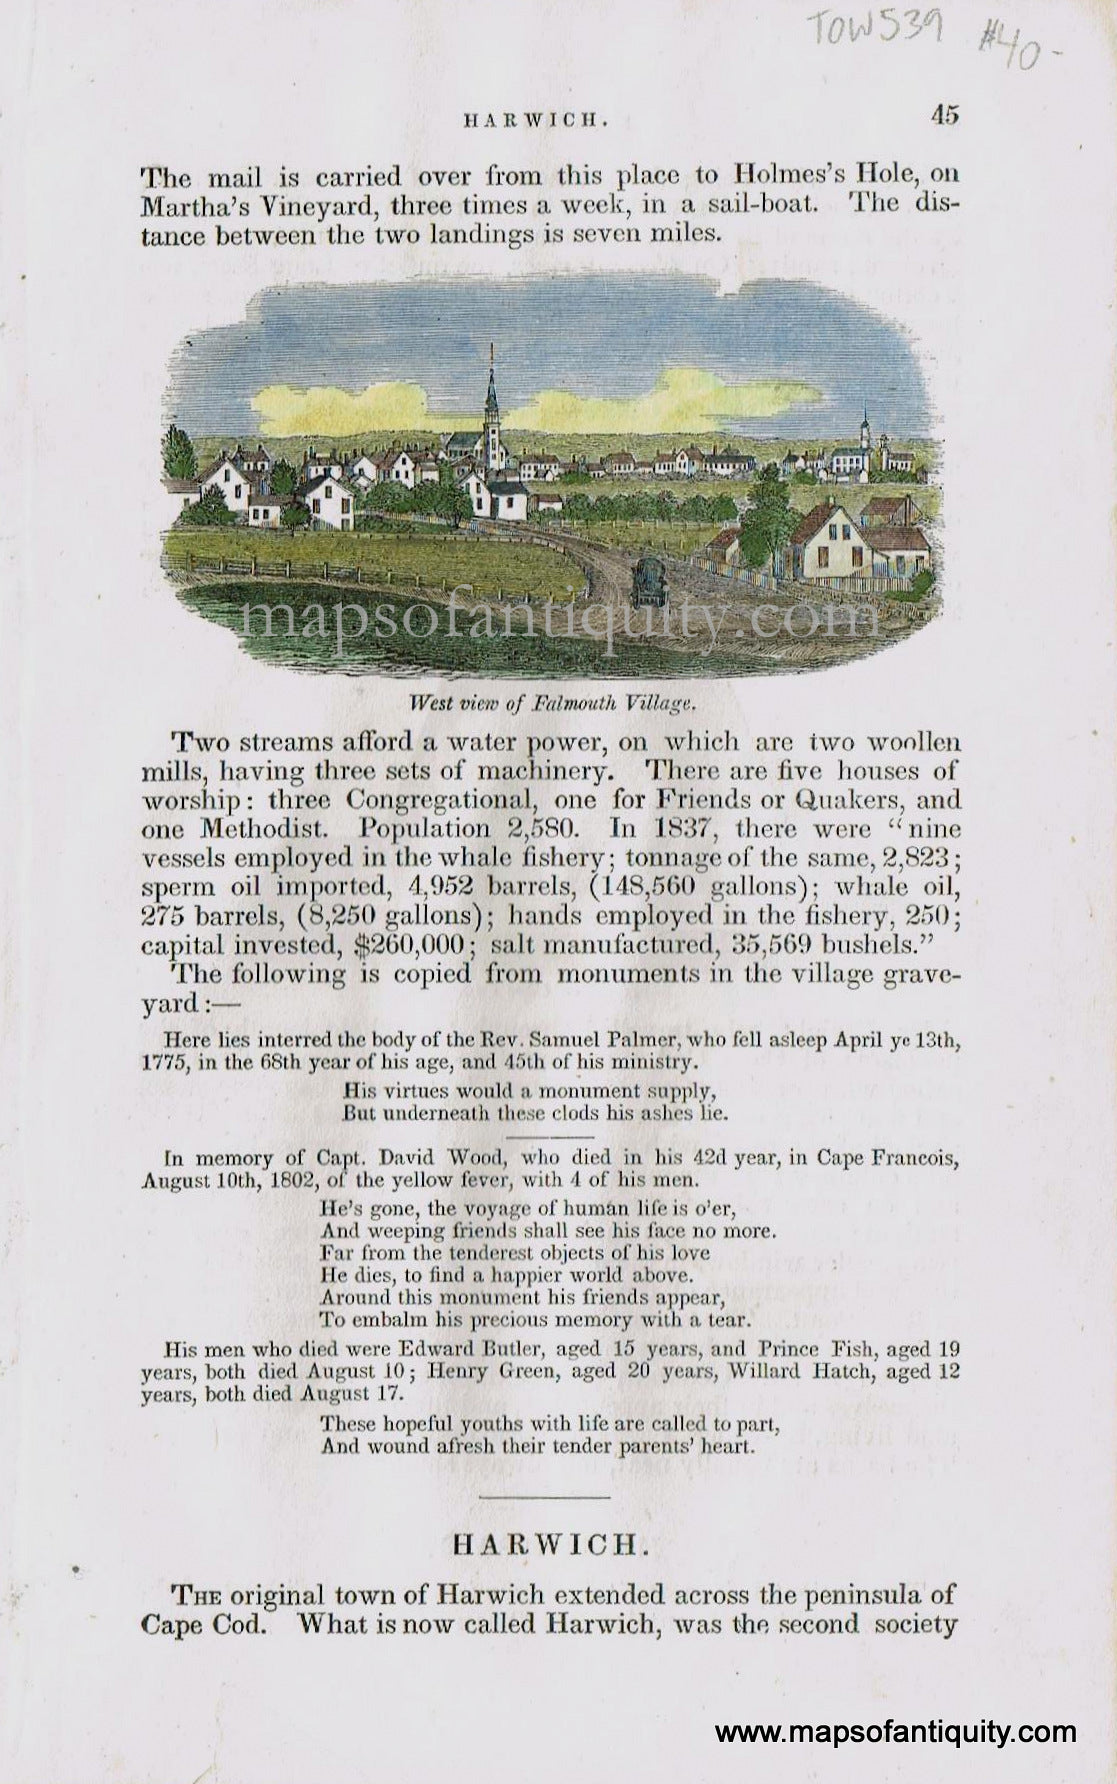 Hand-Colored-Antique-Print-West-View-of-Falmouth-Village-*?-Barber-Falmouth-1800s-19th-century-Maps-of-Antiquity